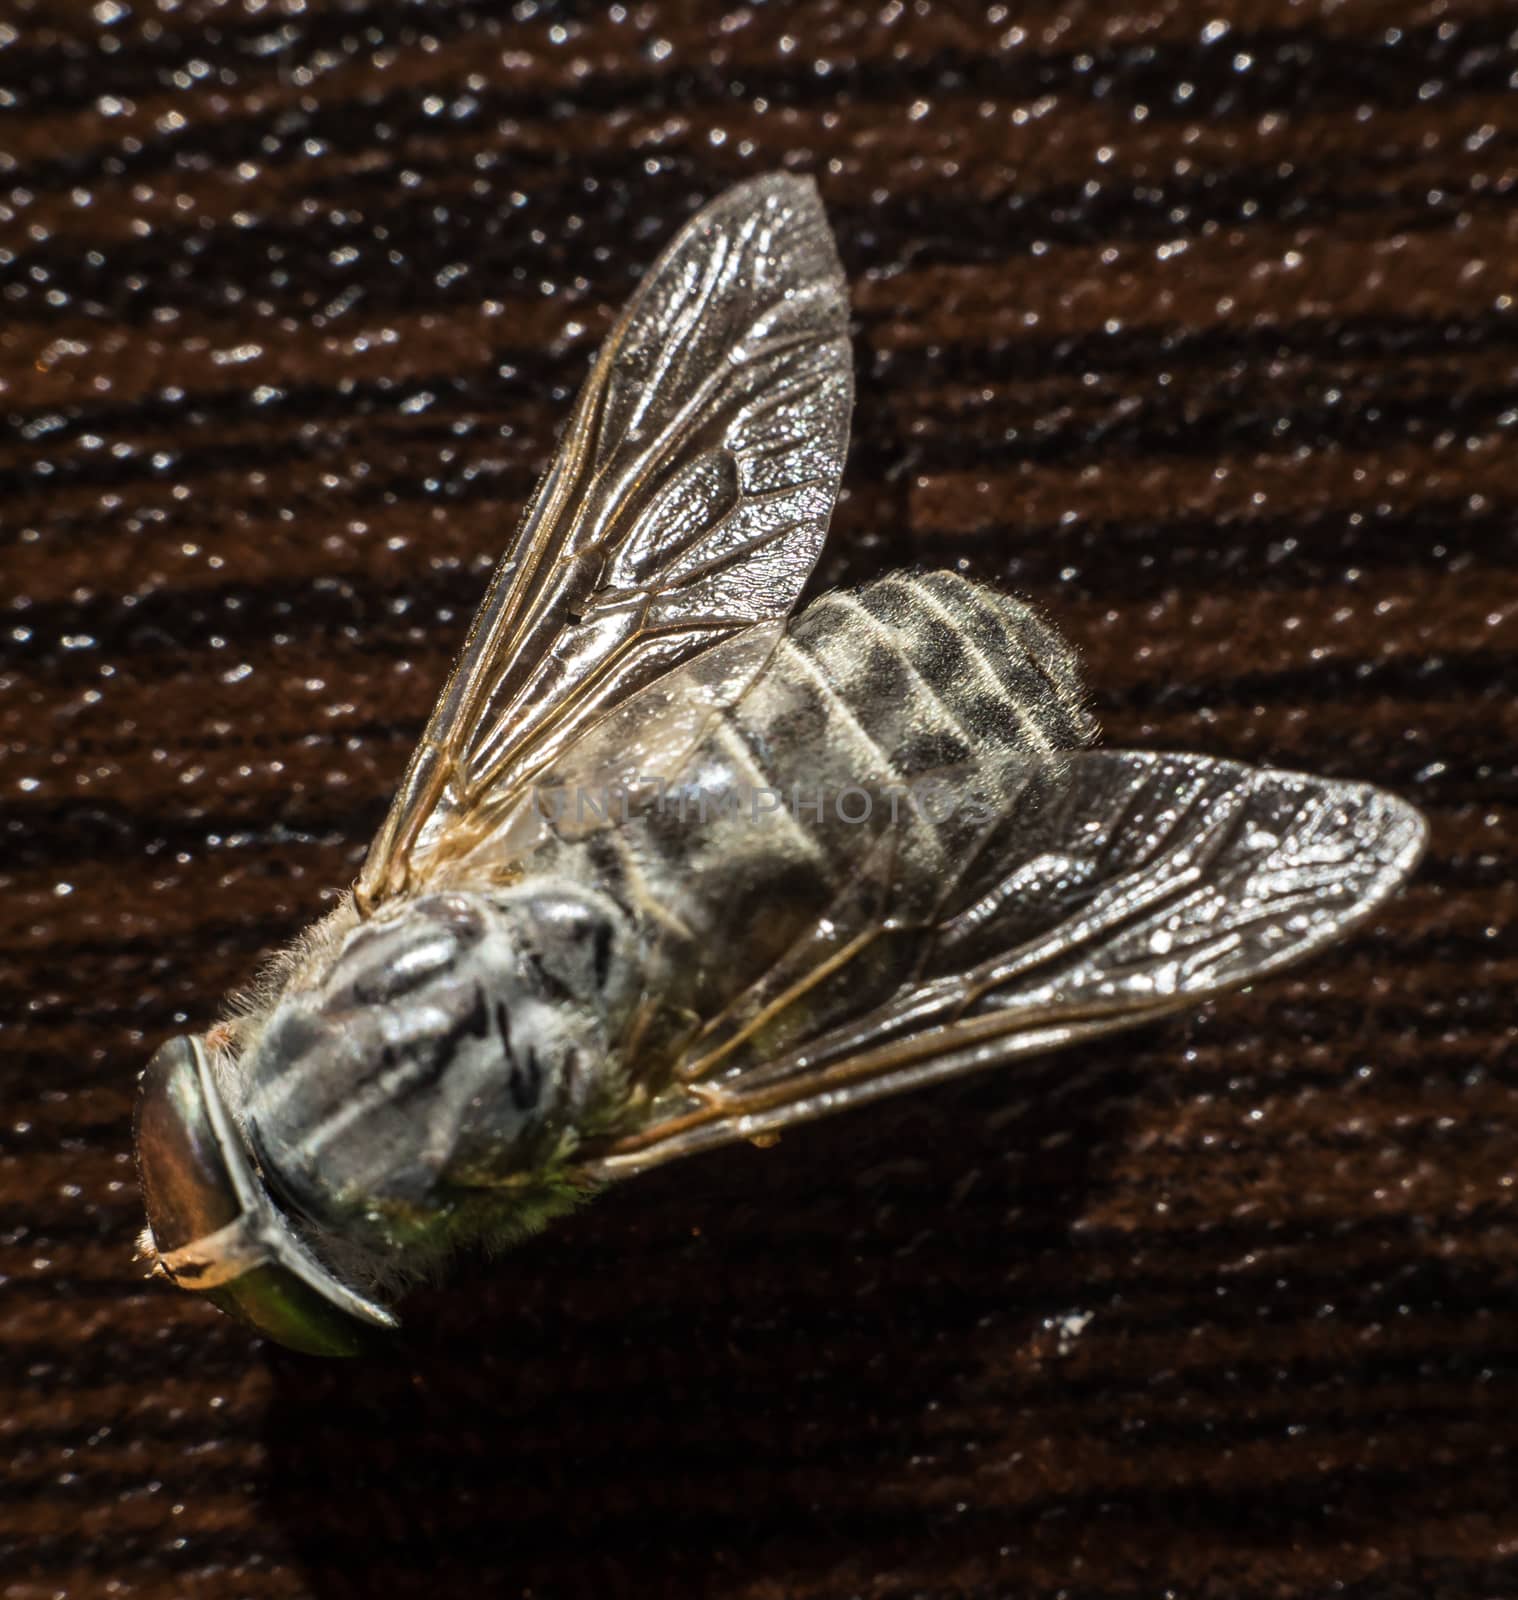 Mixed light. Horsefly or Gadfly or Horse Fly Diptera Insect Macro. Selective focus. by Zeferli